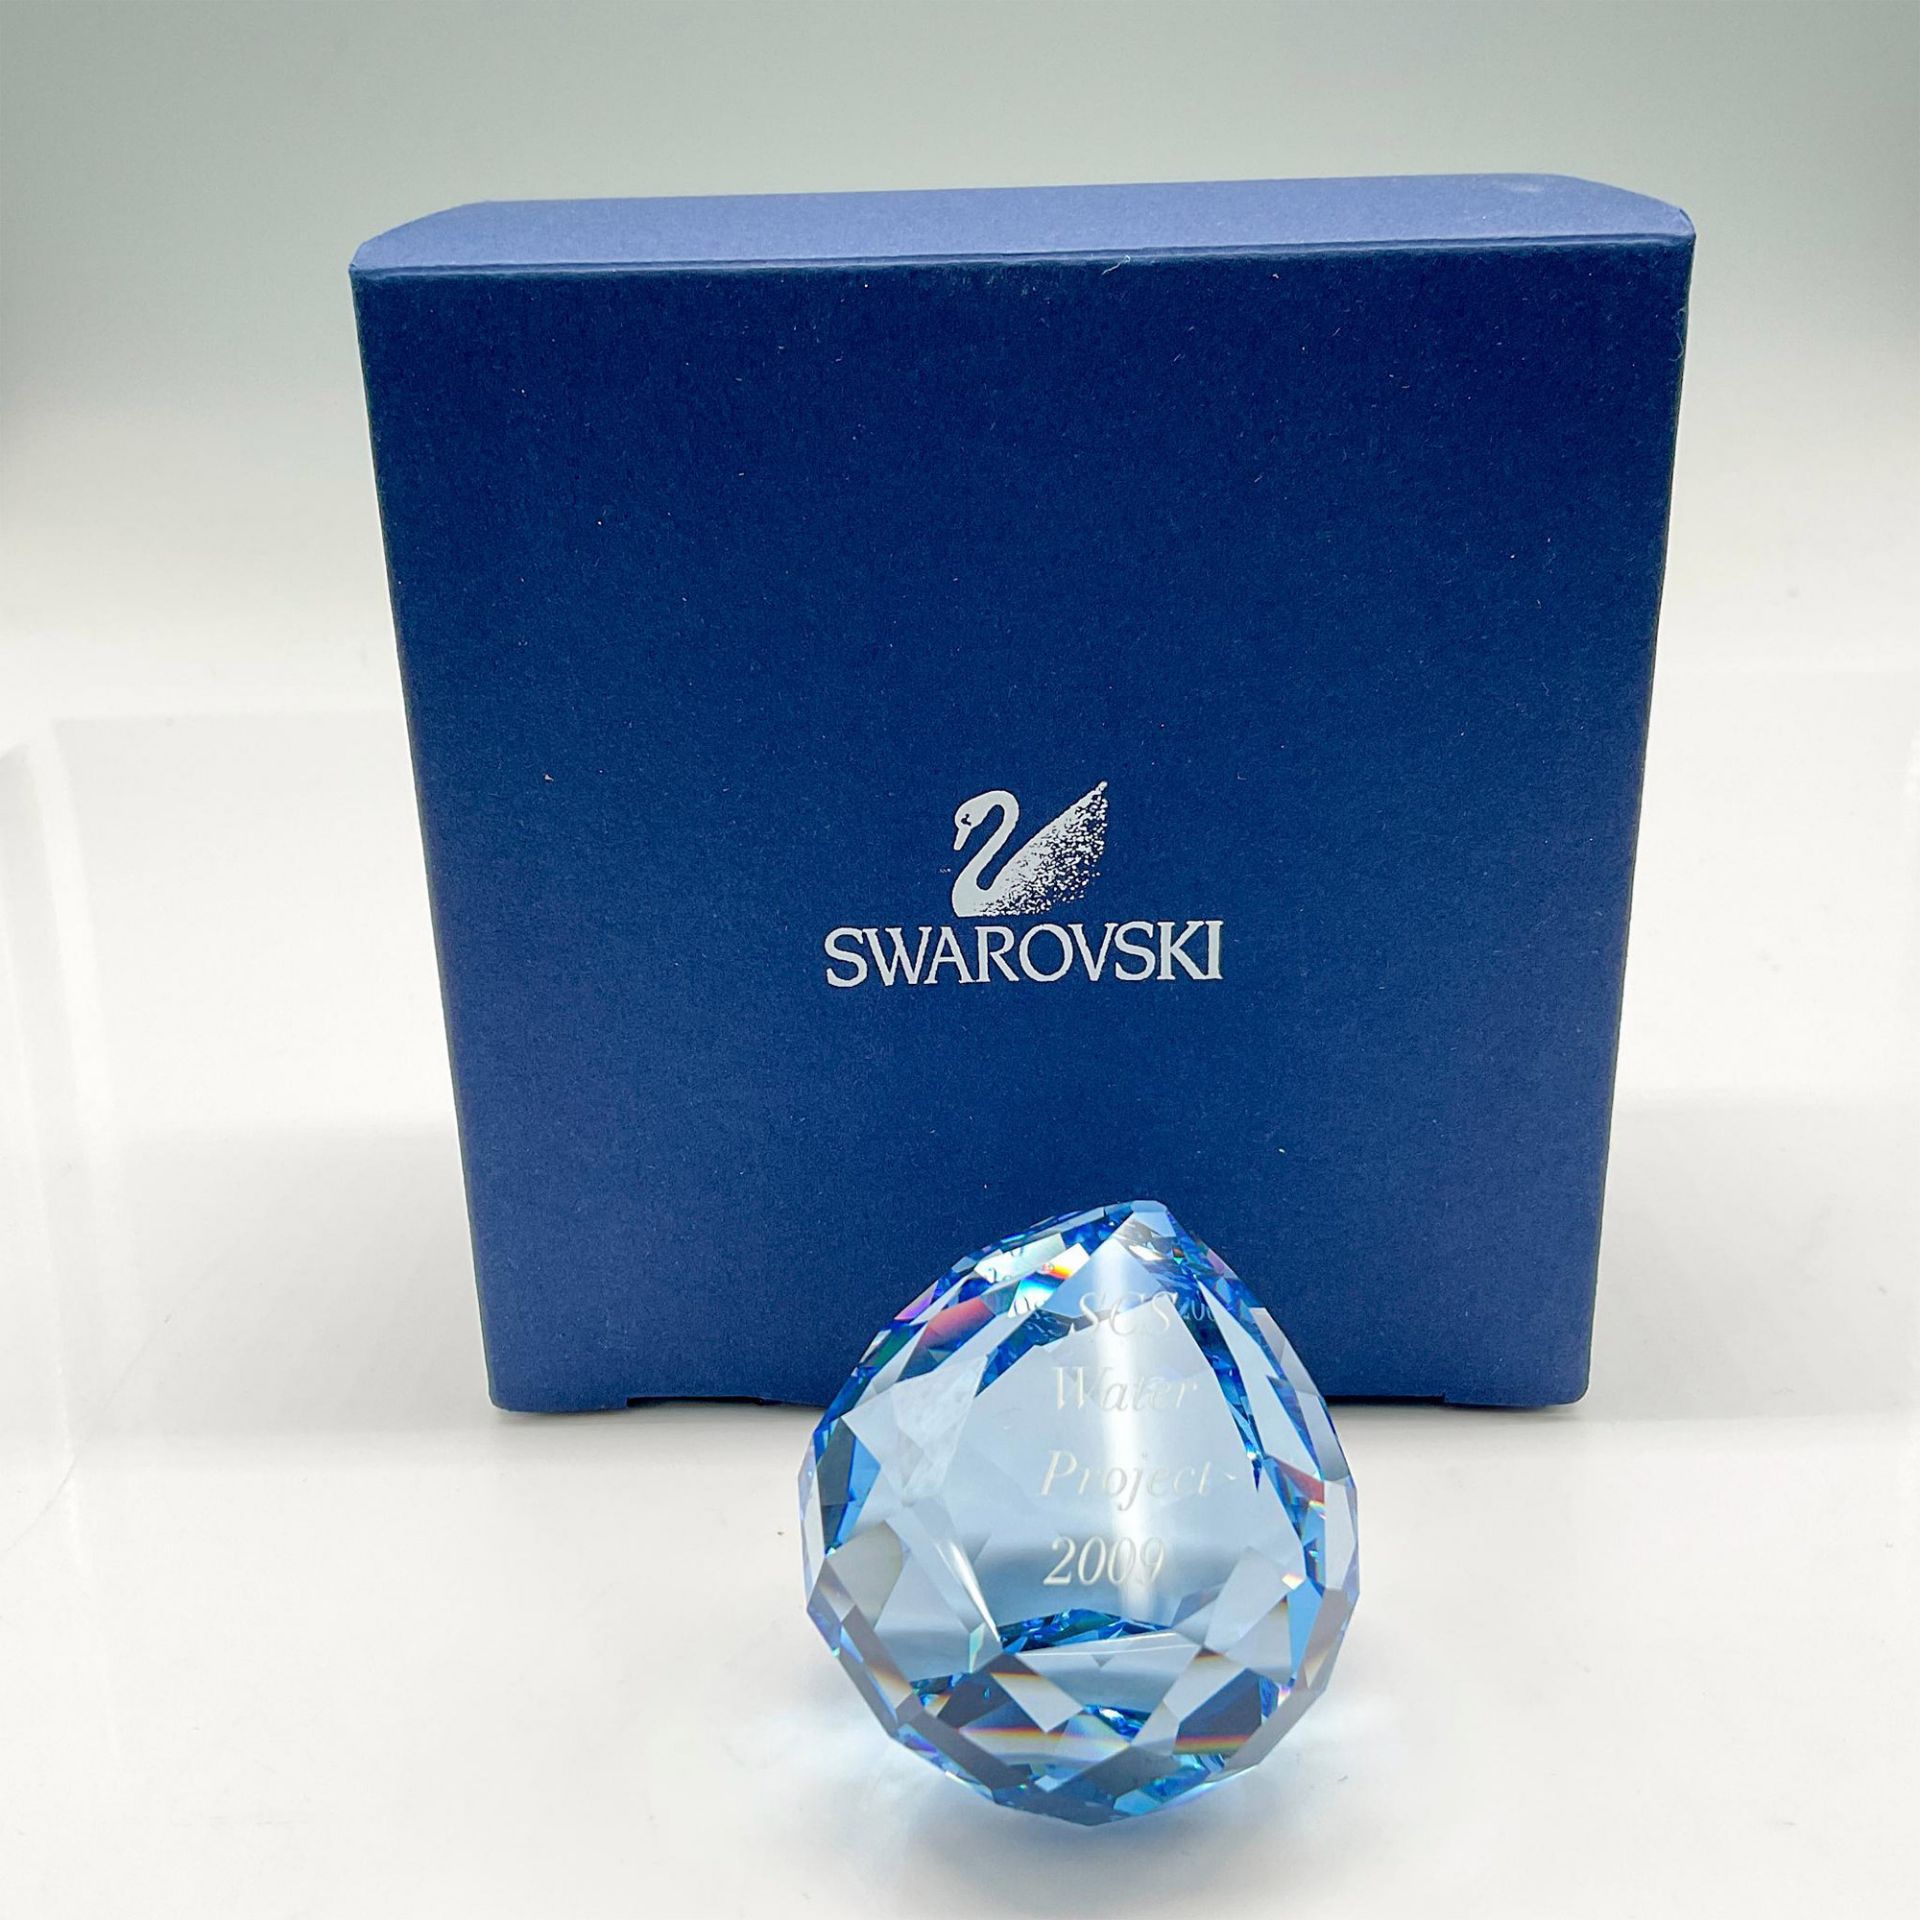 Swarovski SCS Gala Paperweight, 2009 Water Project - Image 4 of 4